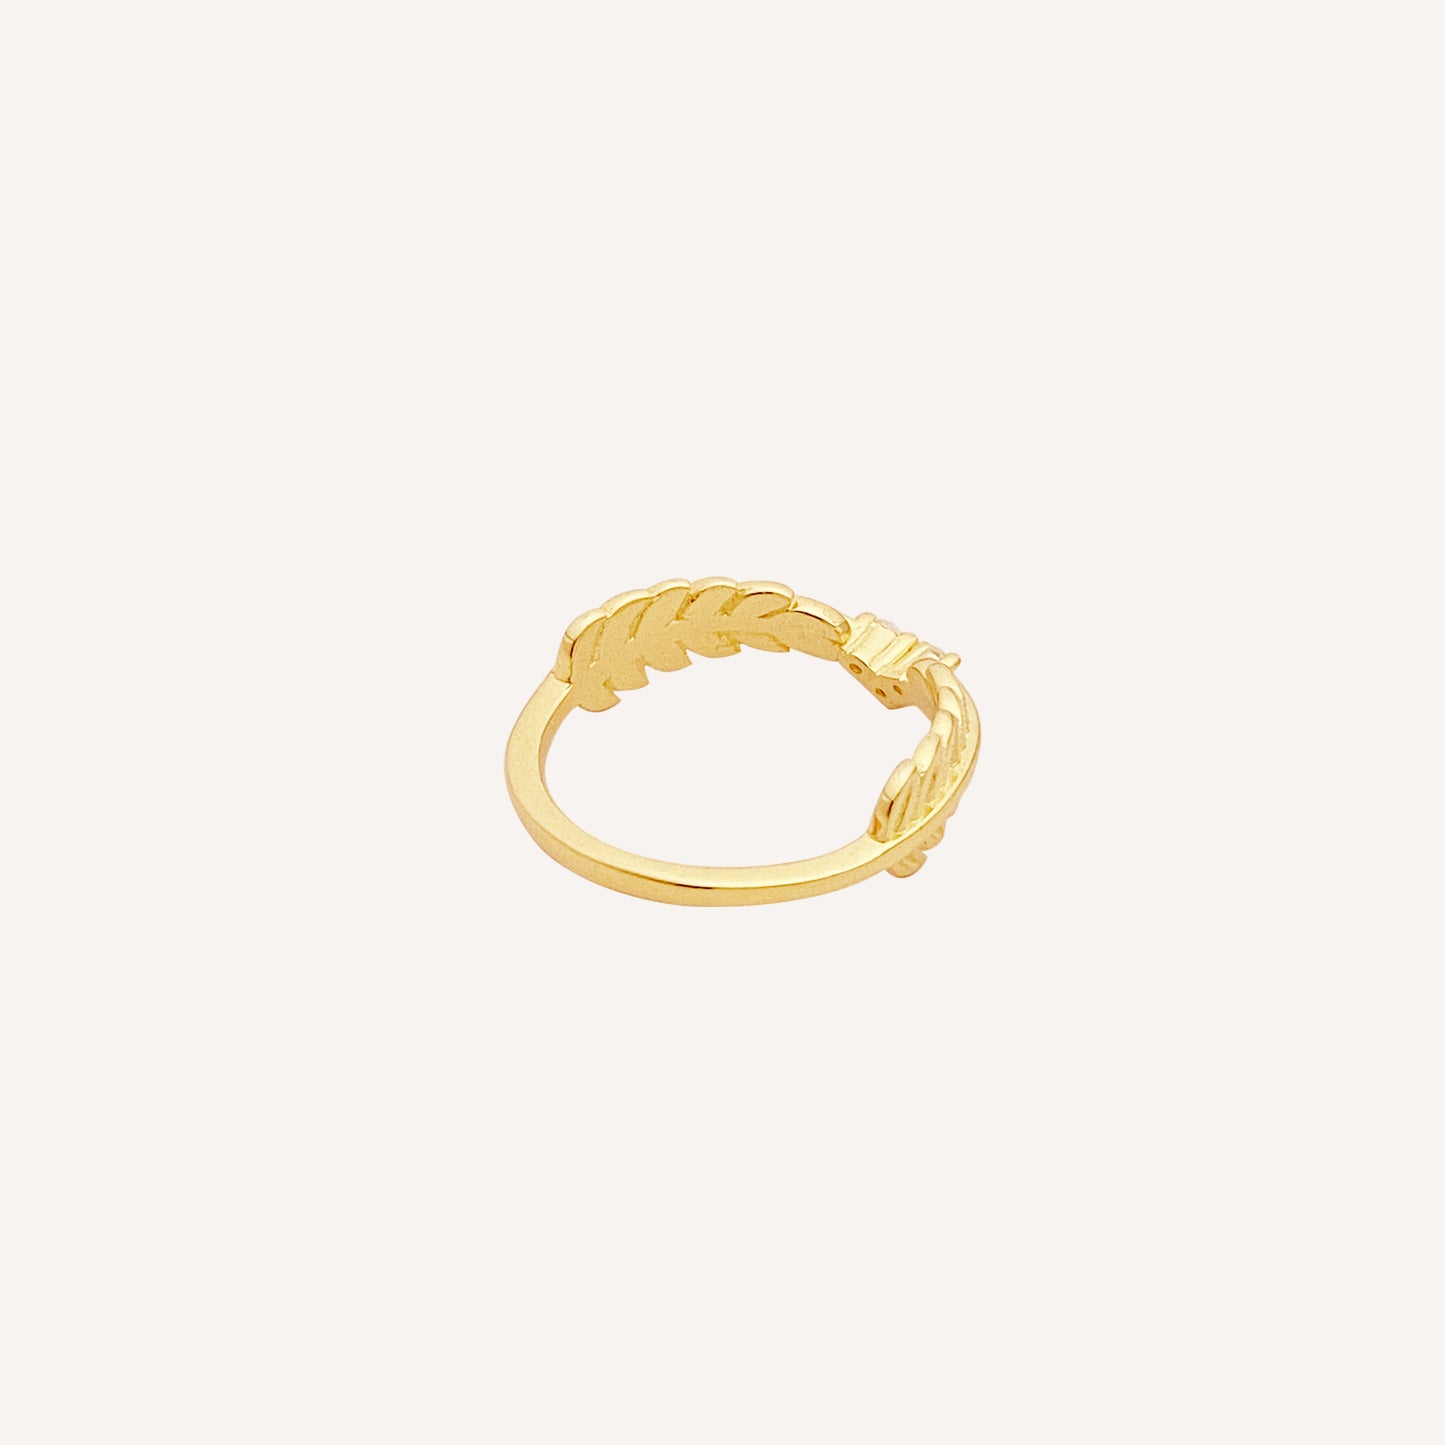 Hane Feather Ring - S5 - S8